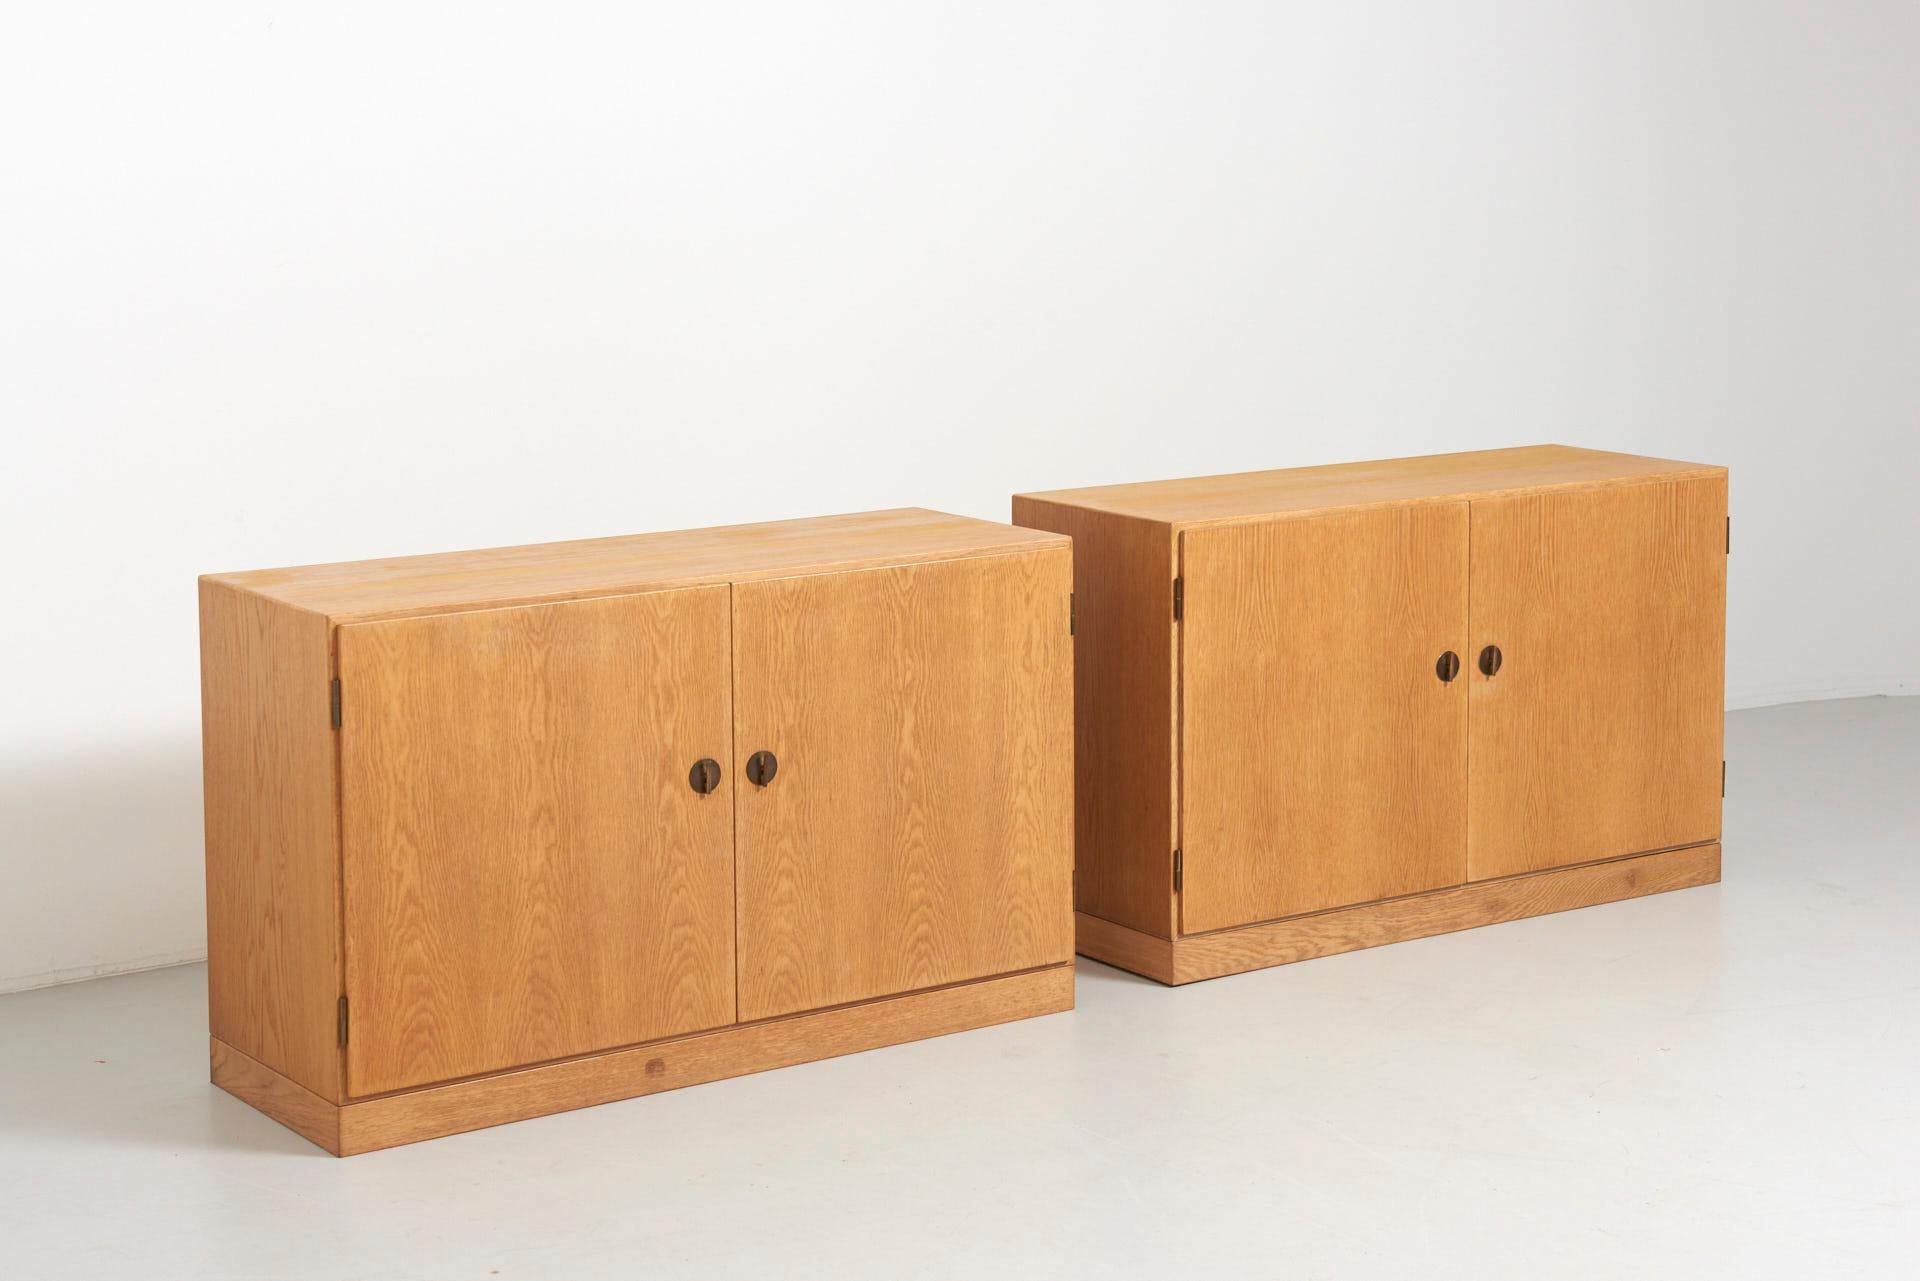 A pair of cabinets in oak on a plinth base. The keys and hinges are in brass. Each cabinet features inner drawers that can be used as trays, and one or two shelves. They are manufactured by CM Madsen for FDB mobler. Design by Børge Mogensen.
Made